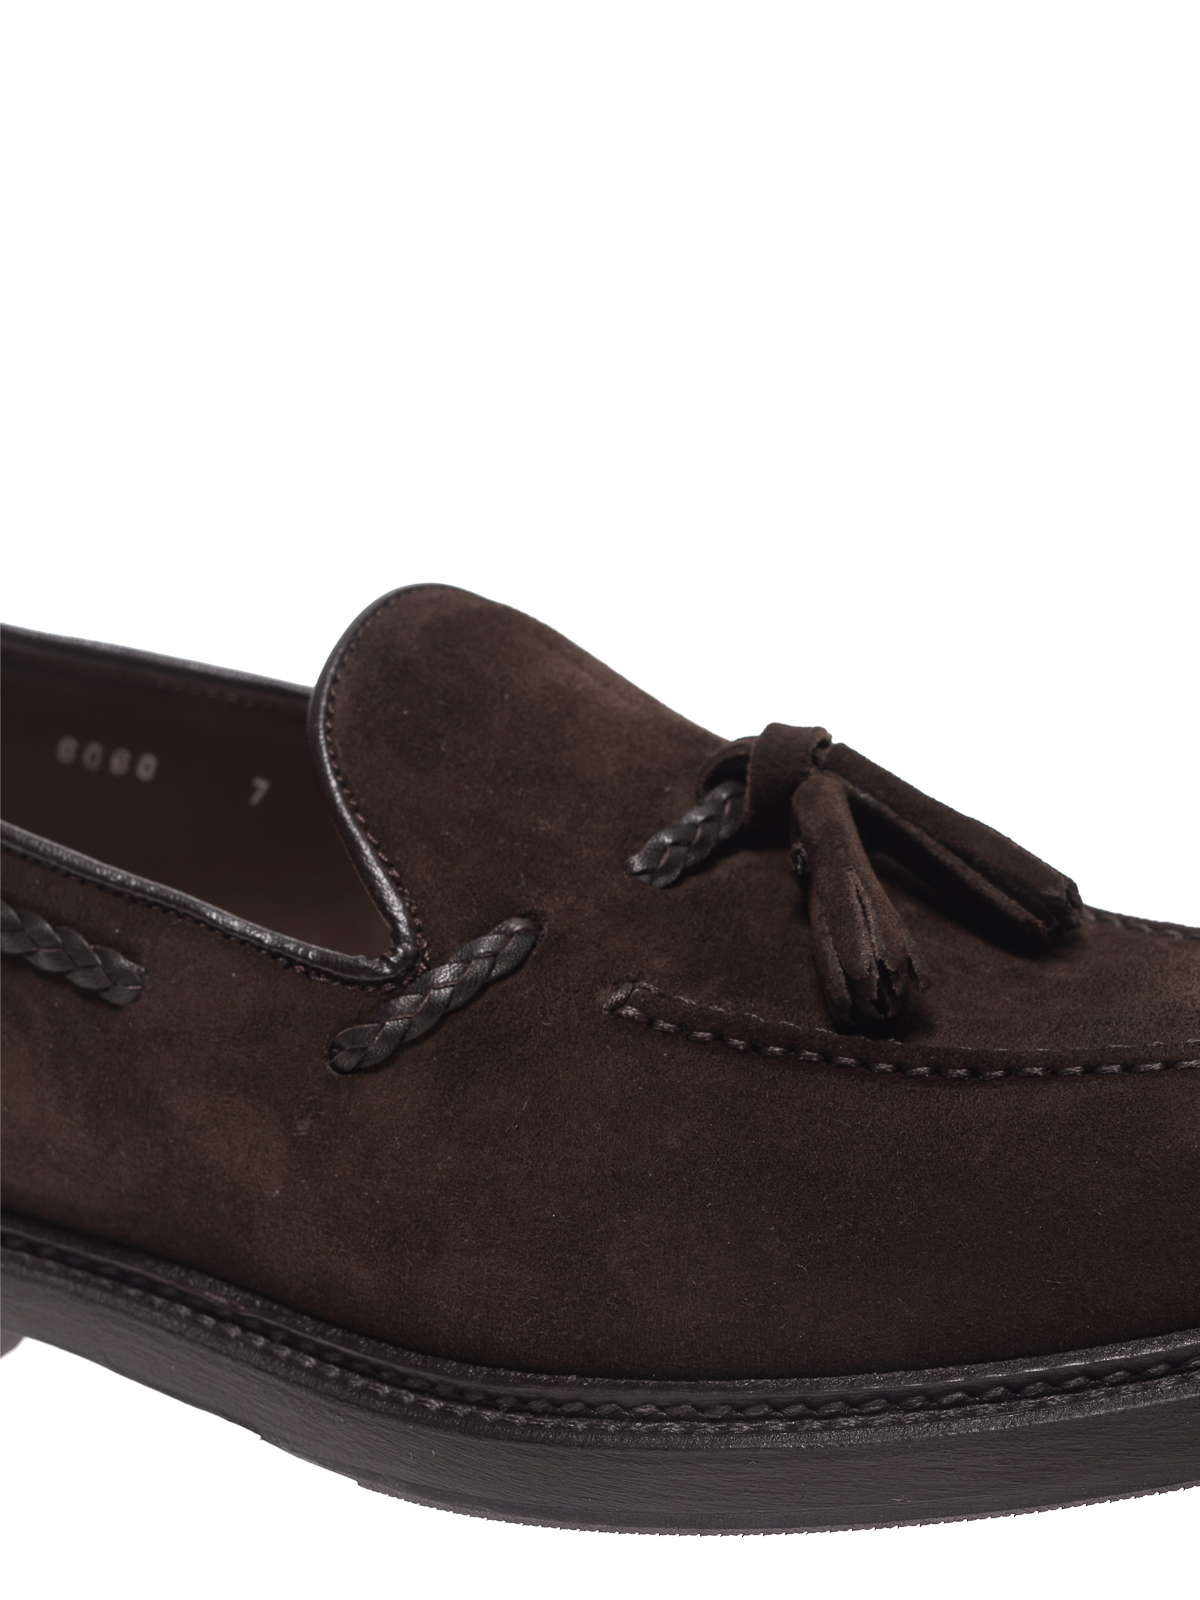 woven suede loafers